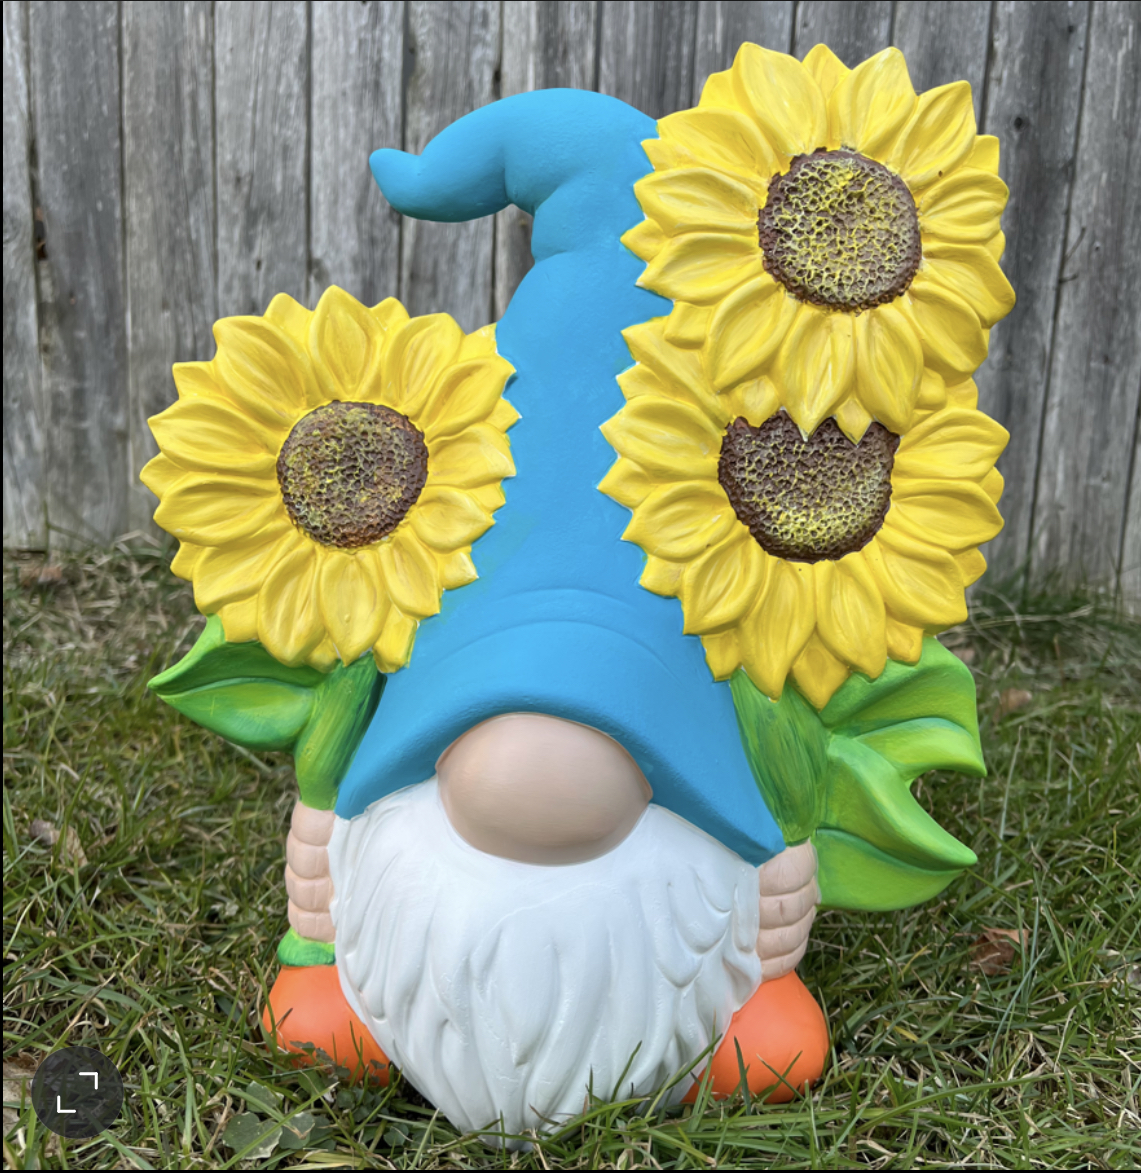 A Ceramic Sunflower Gnome  experience project by Yaymaker